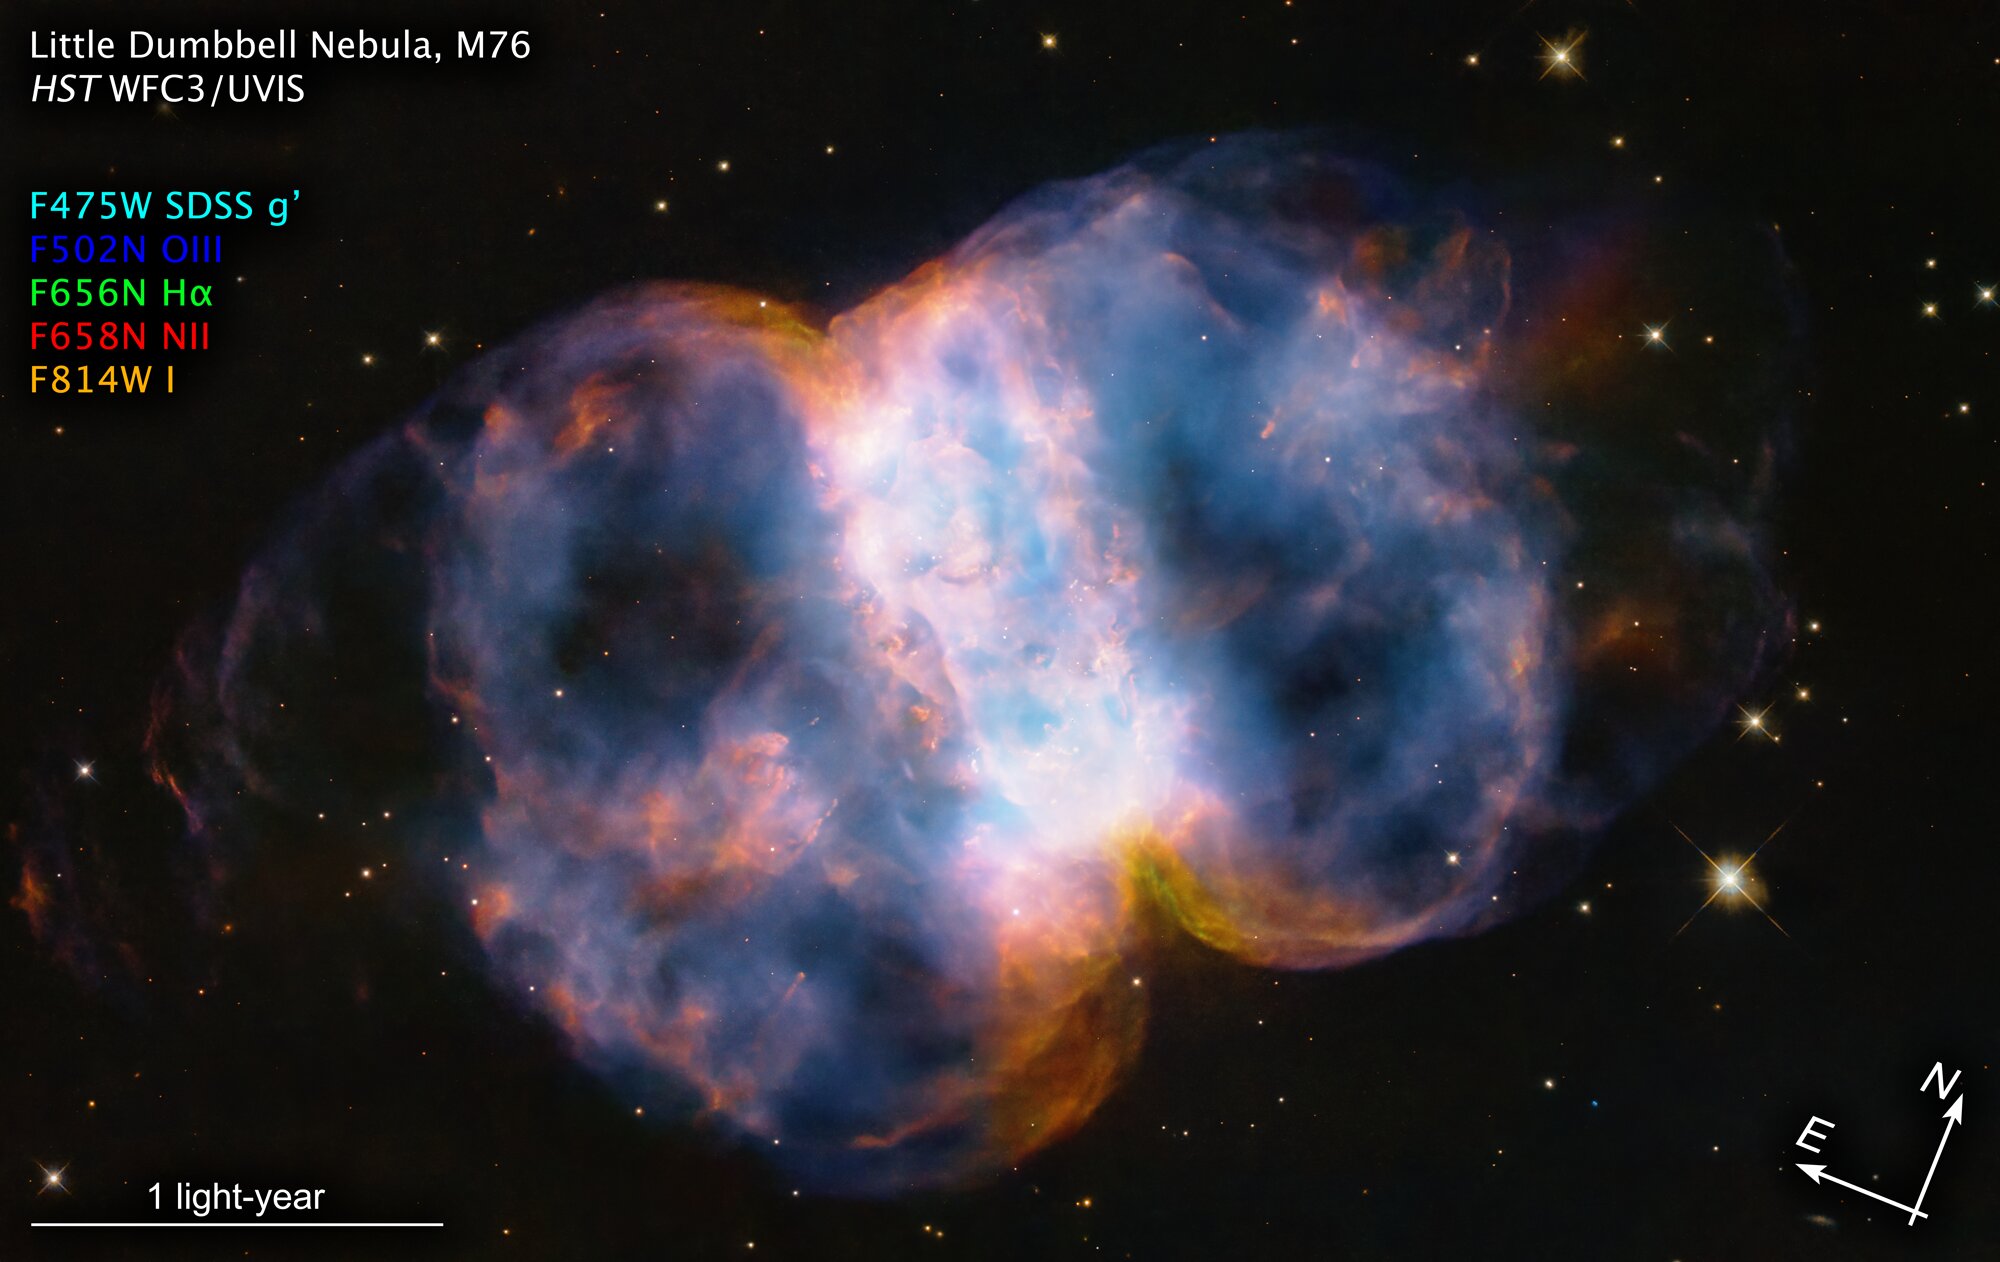 Hubble celebrates 34th anniversary with a look at the little dumbbell nebula